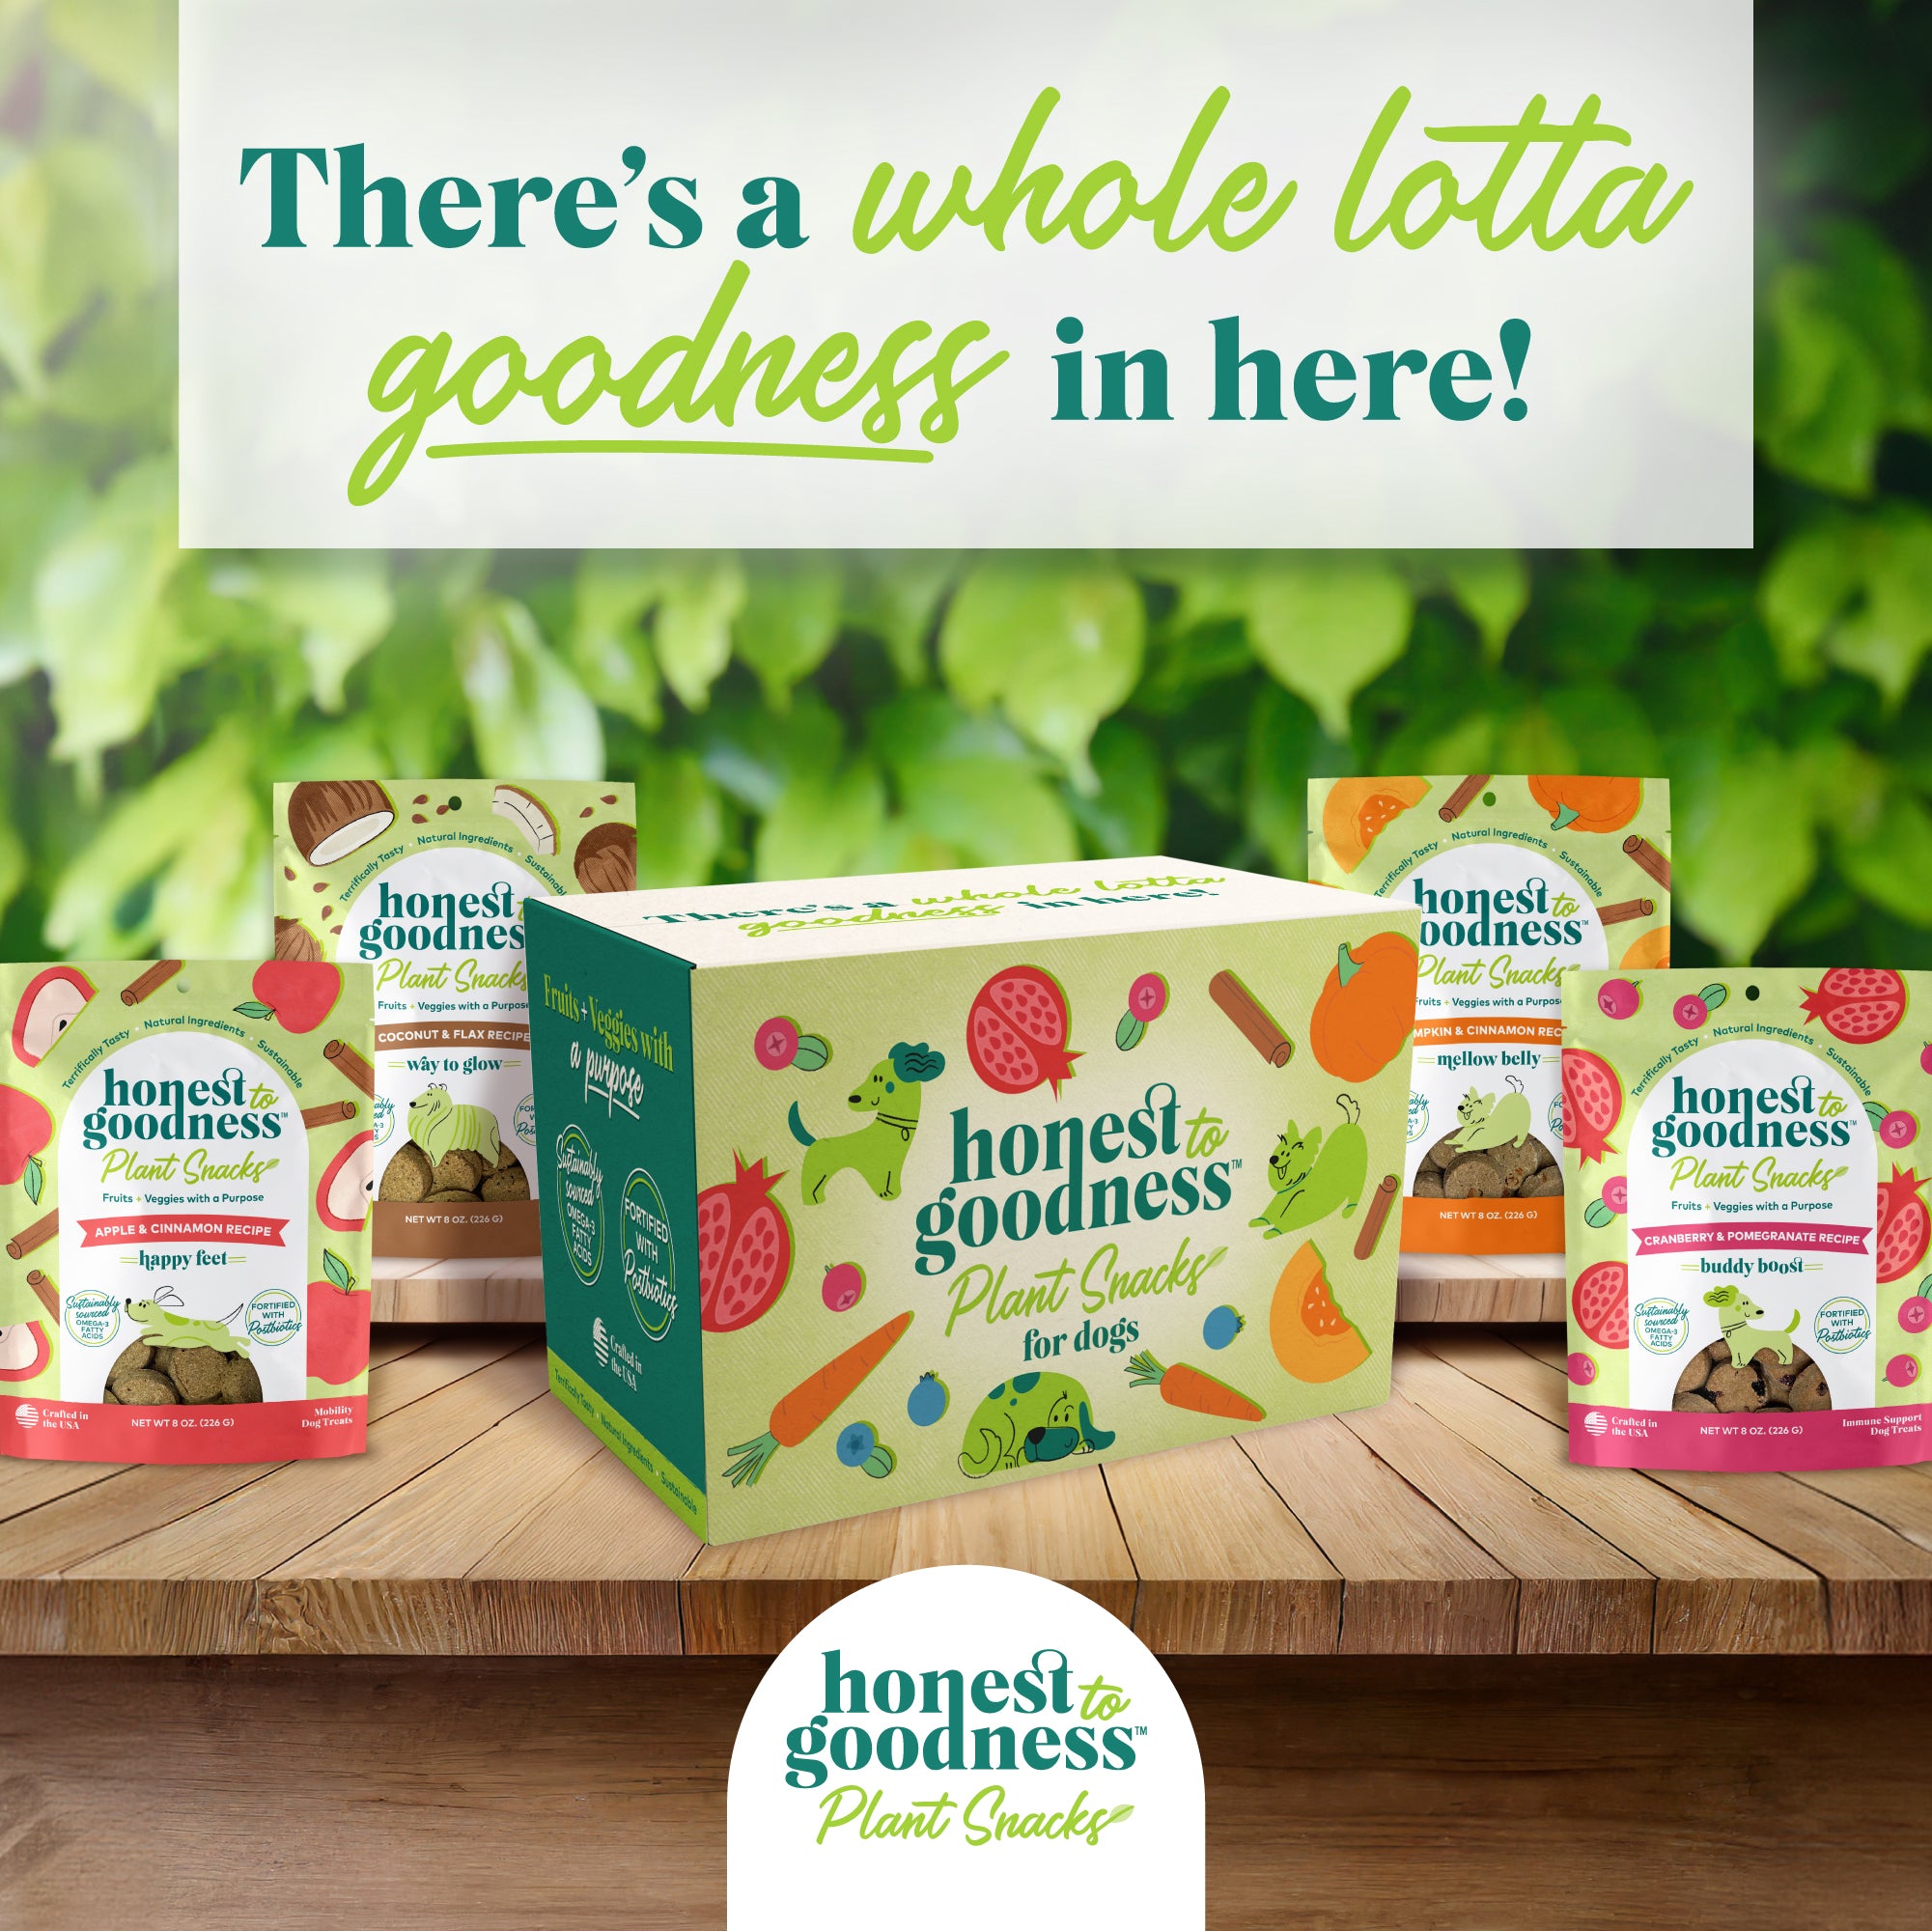 There's a whole lotta goodness in here, plant treats for dogs. 6pk box & 4 pkgs of 50+ treats.